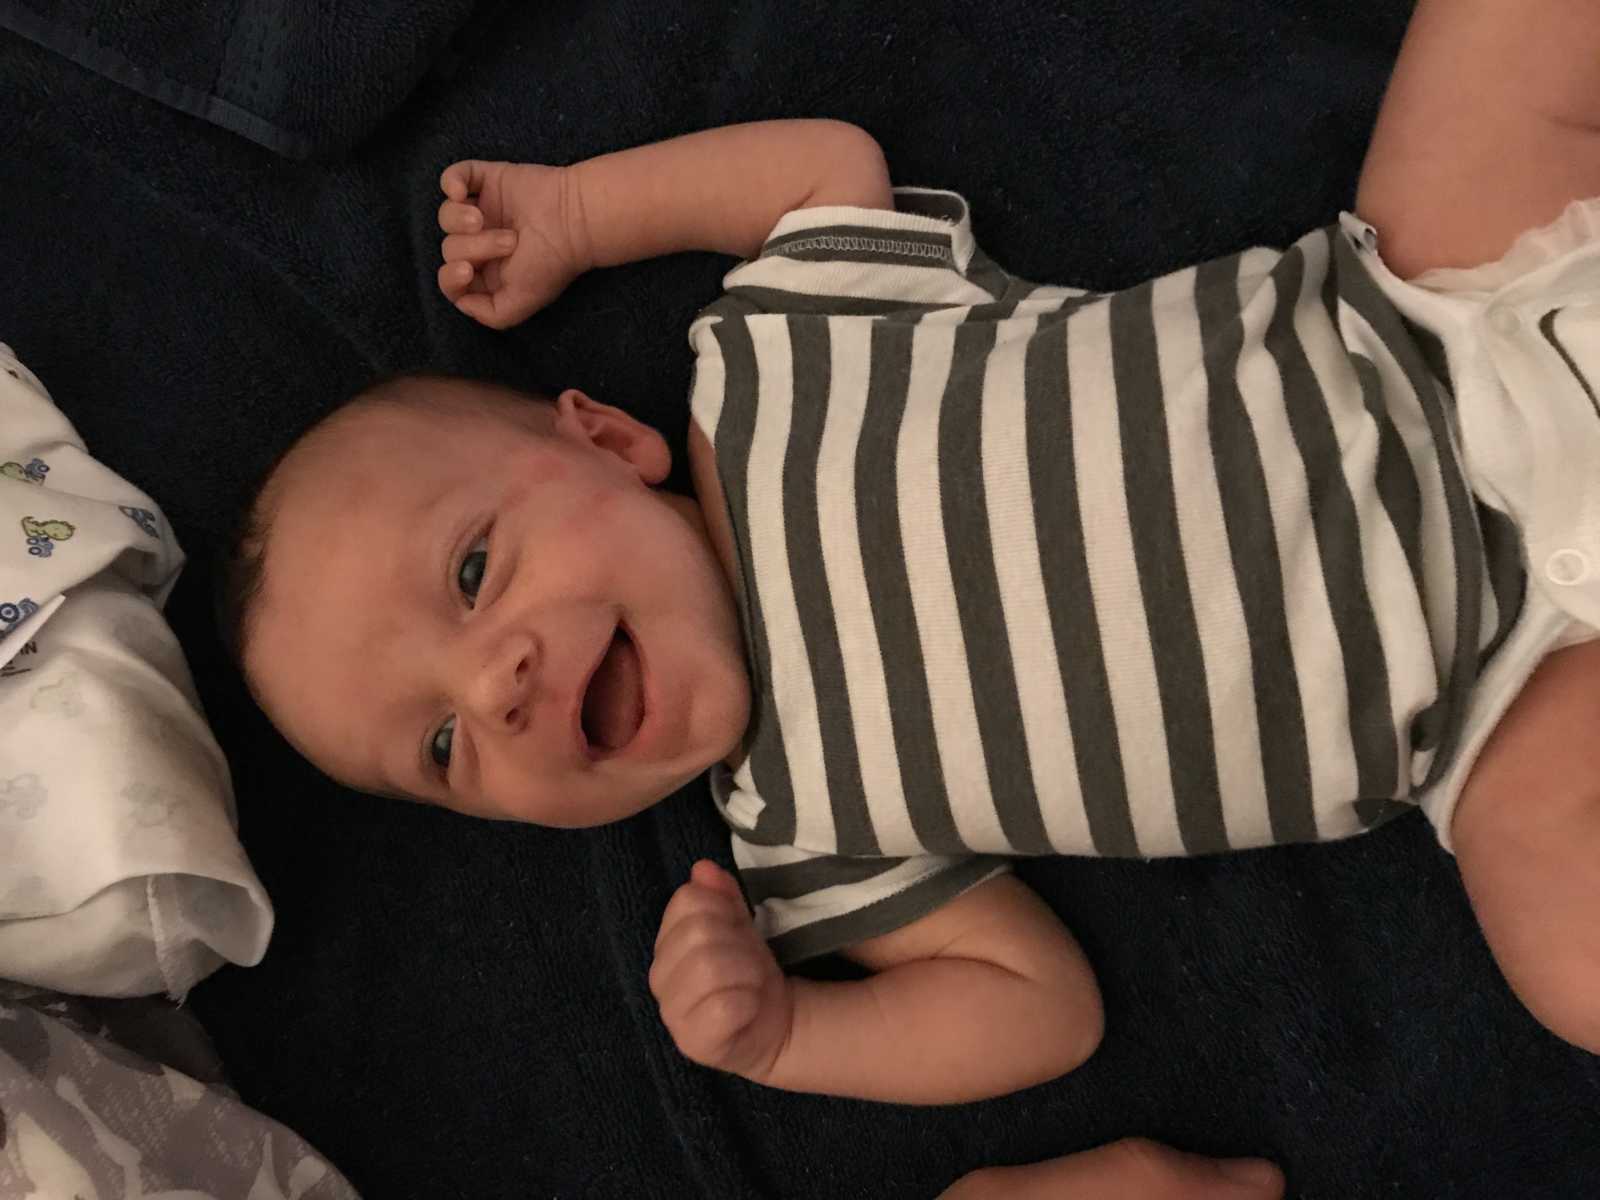 newborn wearing a green and white striped onesie smiles while lying on his back